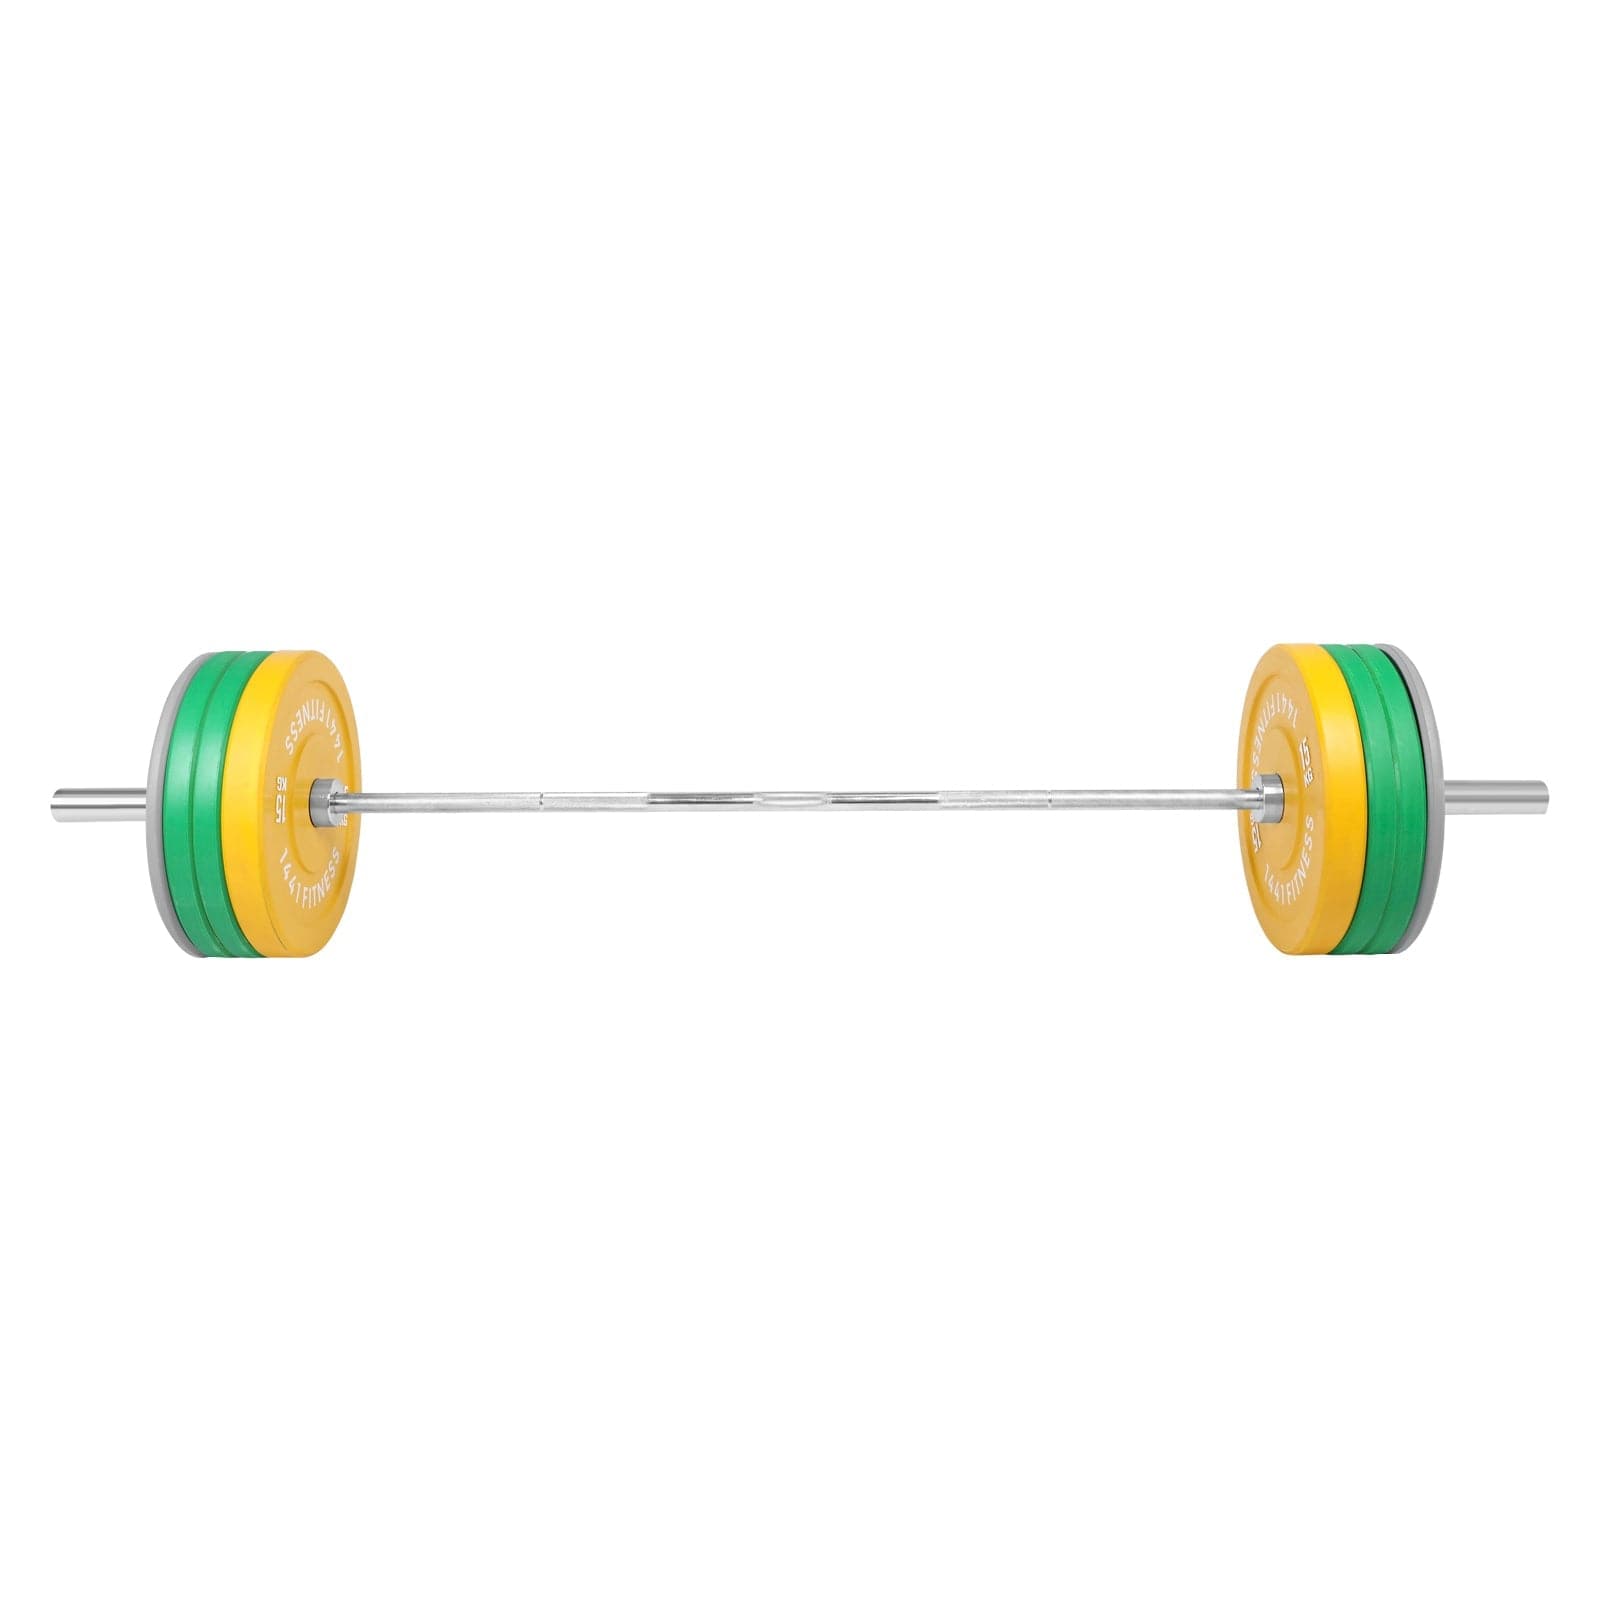 Combo 7 Ft Olympic Barbell and Color Bumper Plate Set - 100 KG | 1441 Fitness - Athletix.ae